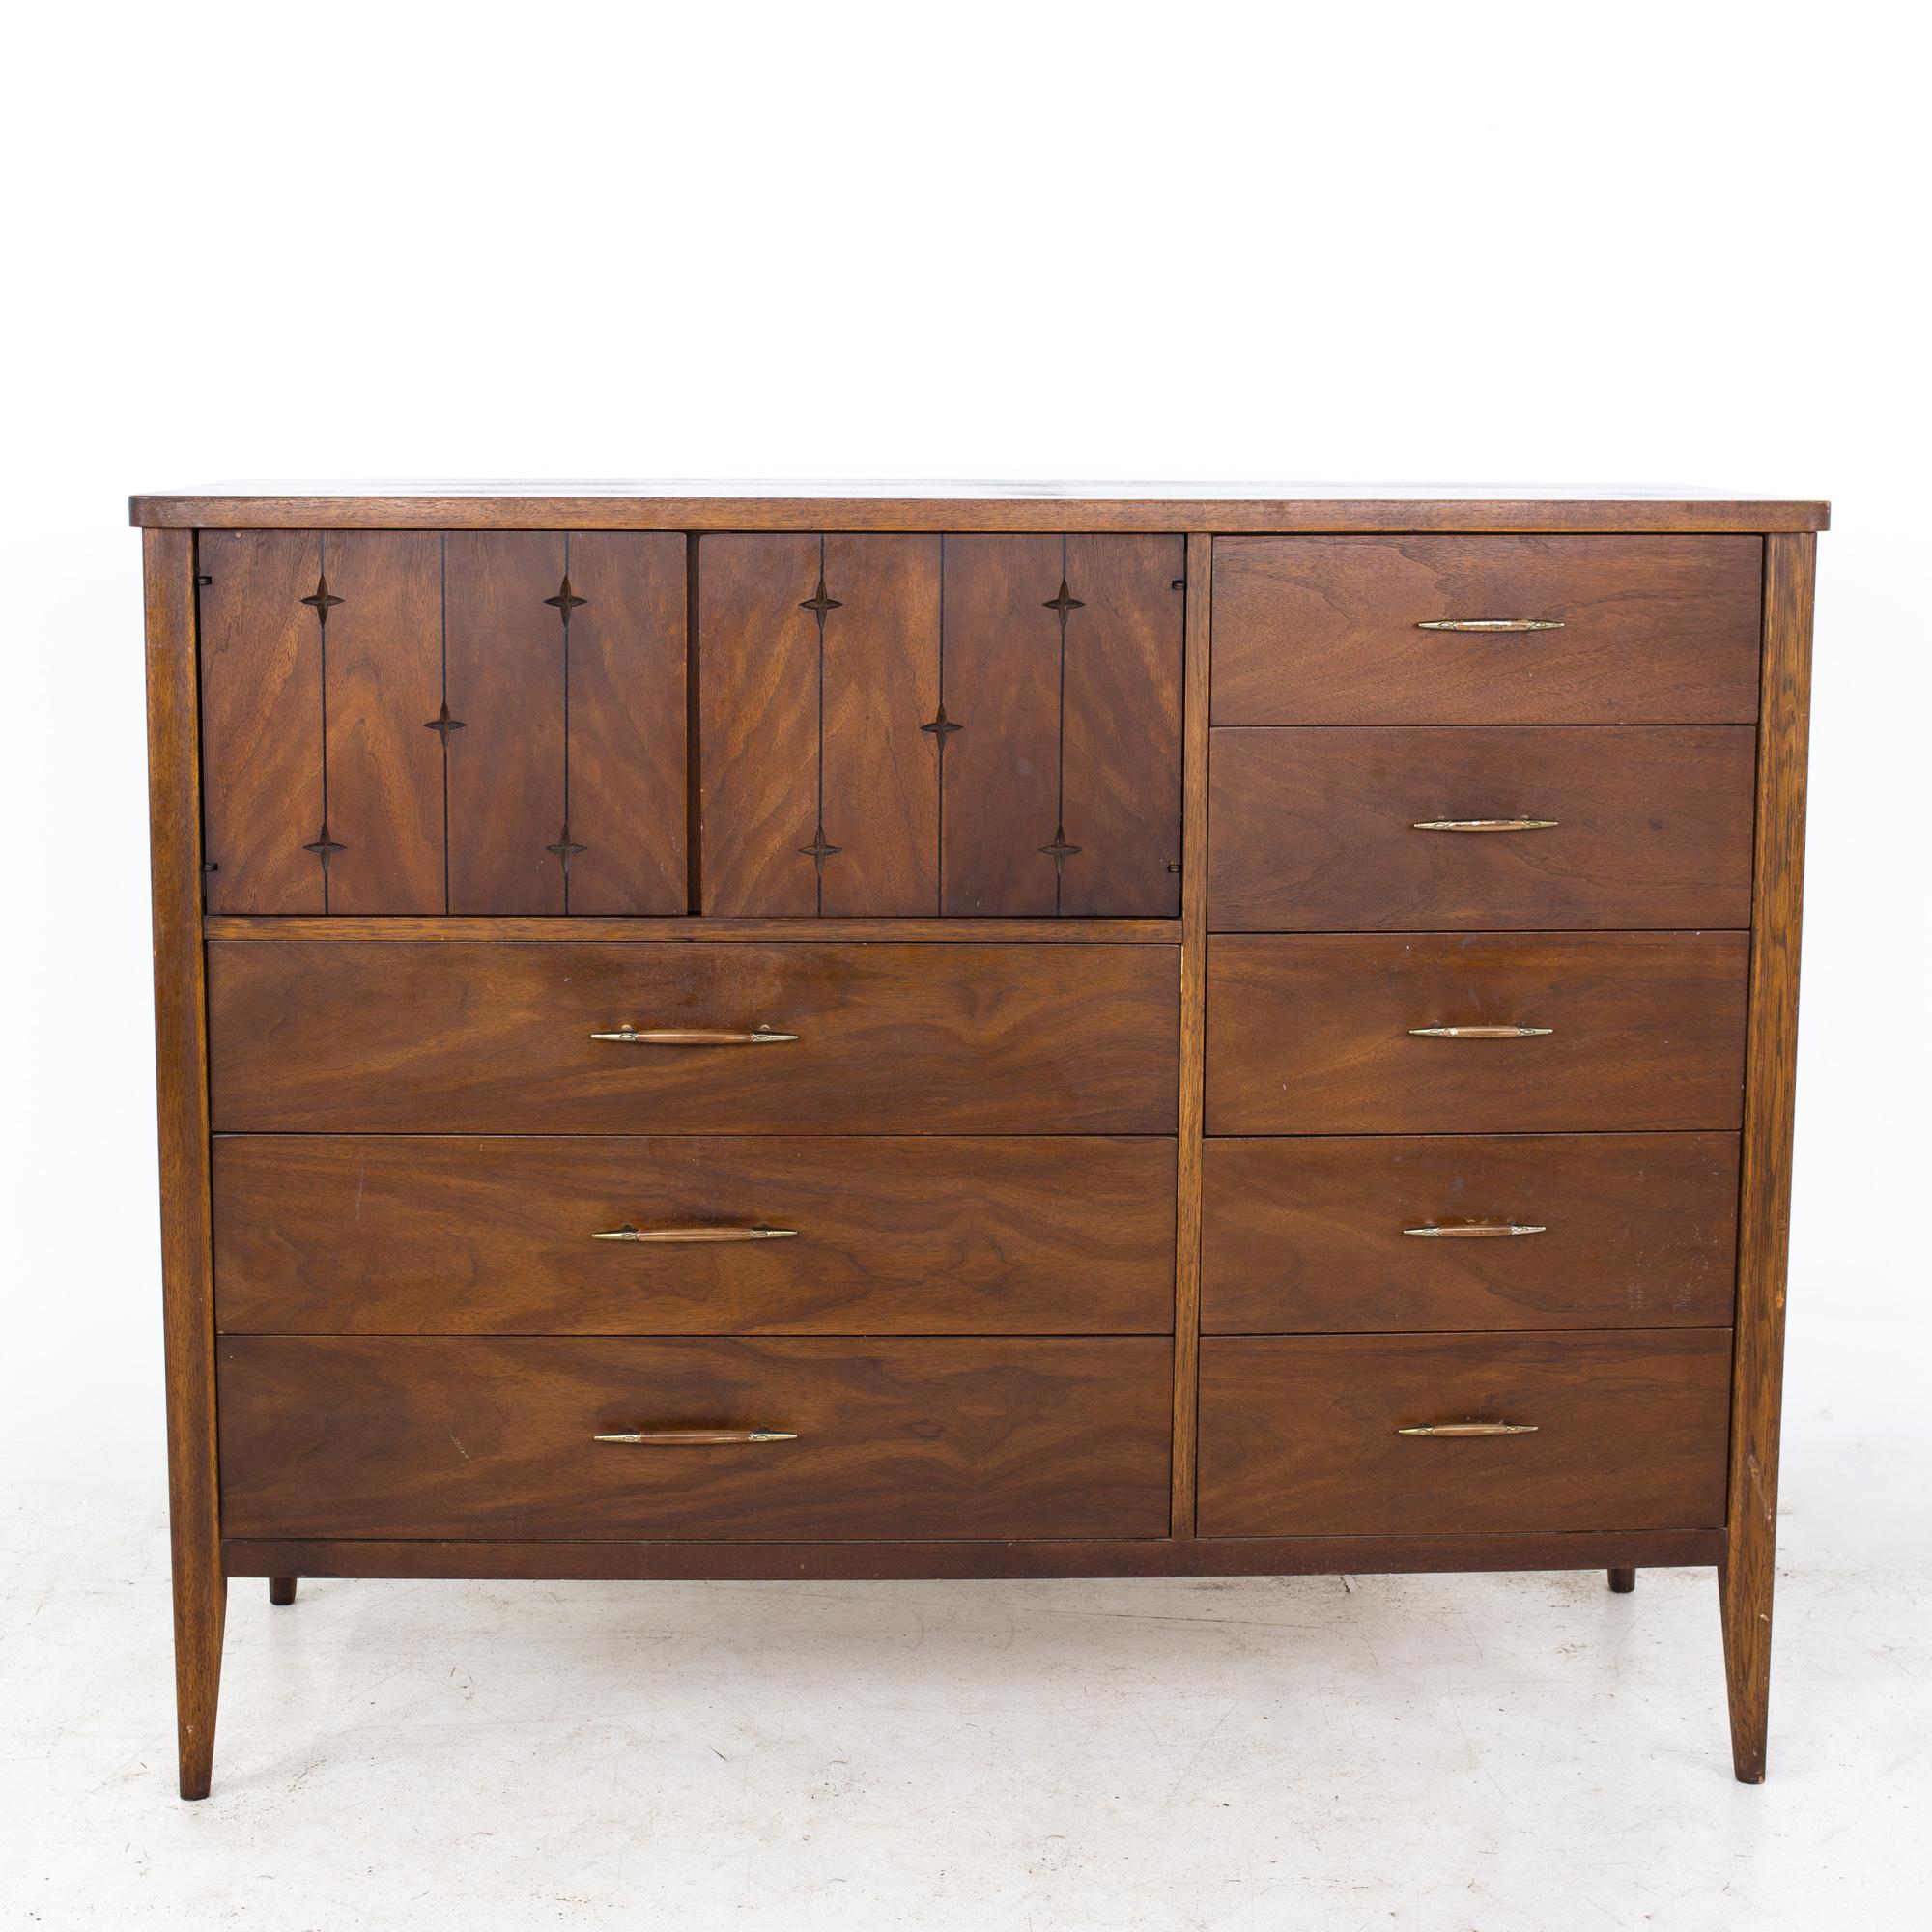 Broyhill Saga Mid Century Walnut Magna Highboy Dresser
Dresser measures: 54.75 wide x 19.25 deep x 43.75 inches high

All pieces of furniture can be had in what we call restored vintage condition. That means the piece is restored upon purchase so